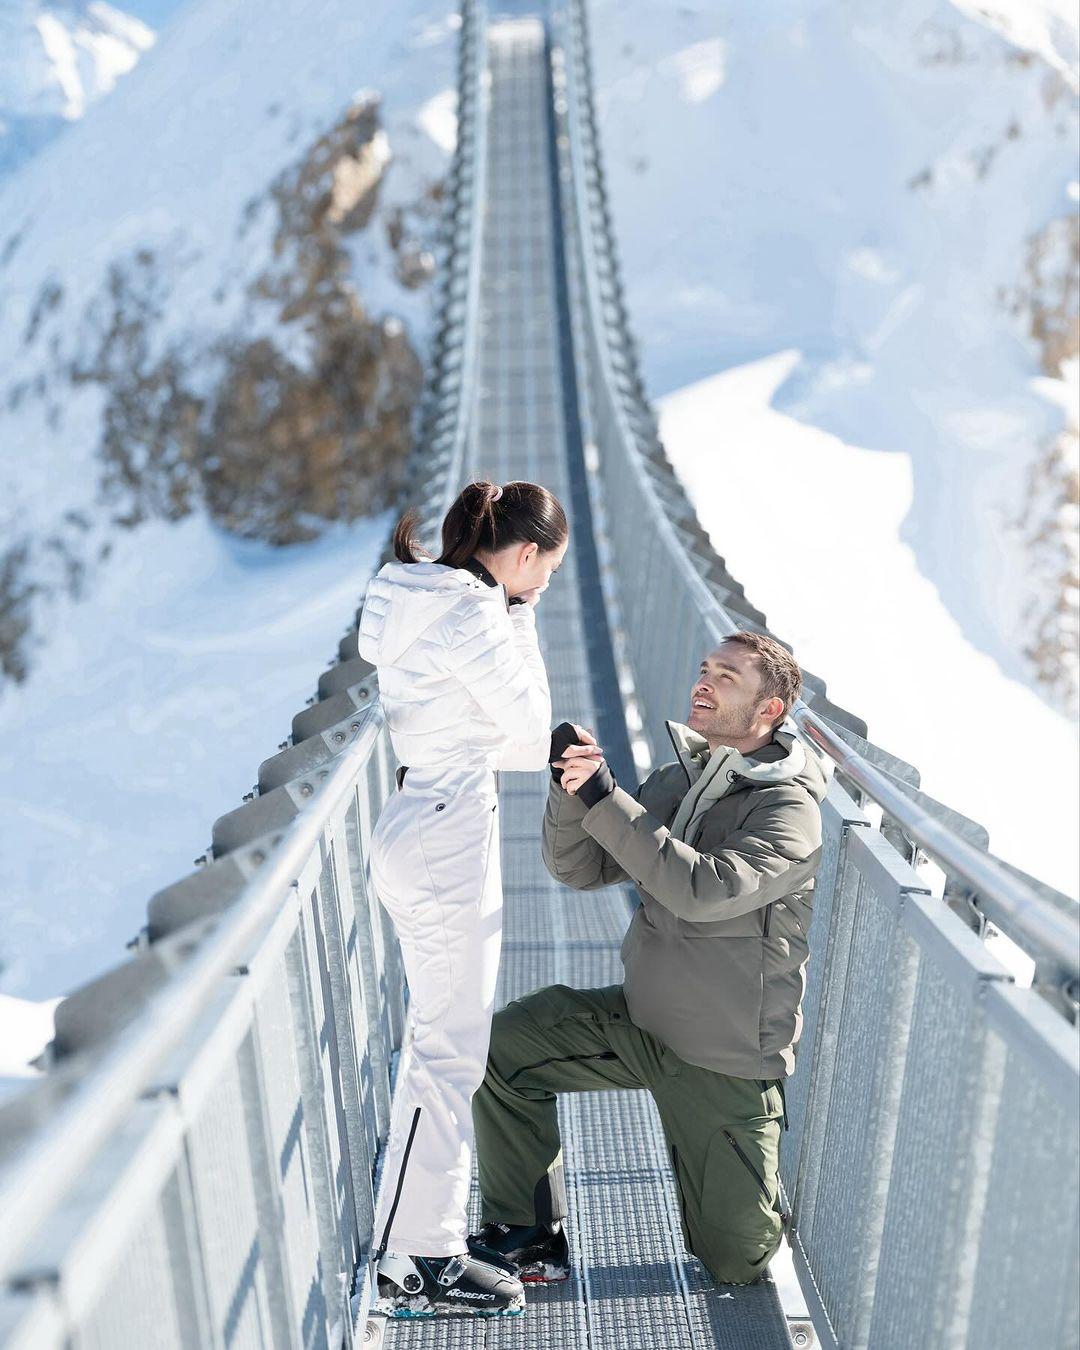 Now, the couple is officially engaged, with Ed Westwick proposing to Amy in the picturesque icy mountains of Switzerland.